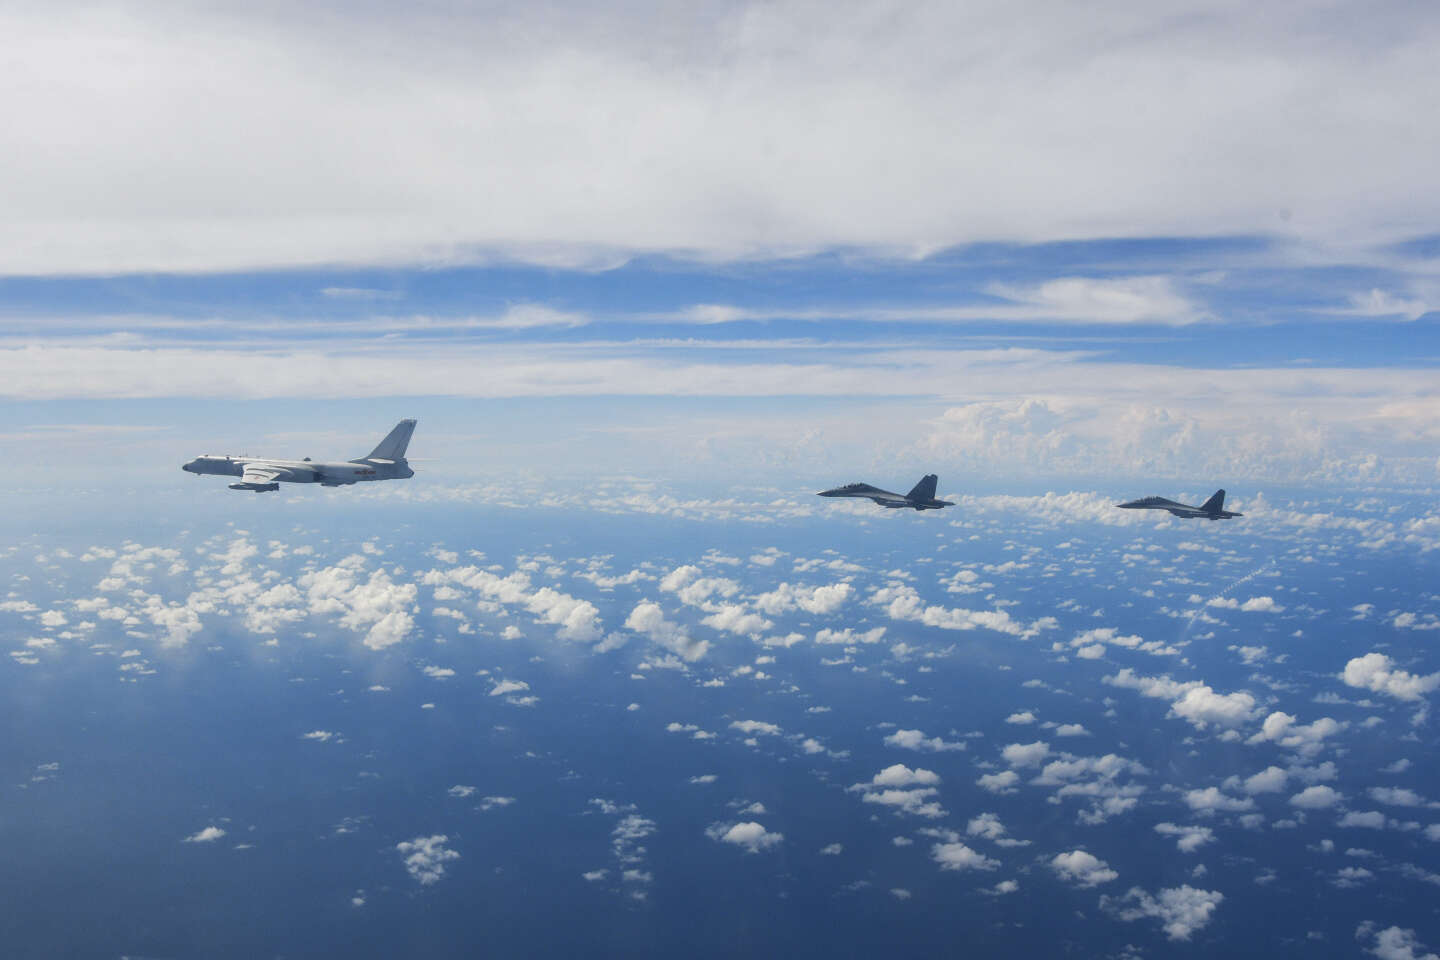 In twenty-four hours, 36 Chinese military aircraft were spotted around the island